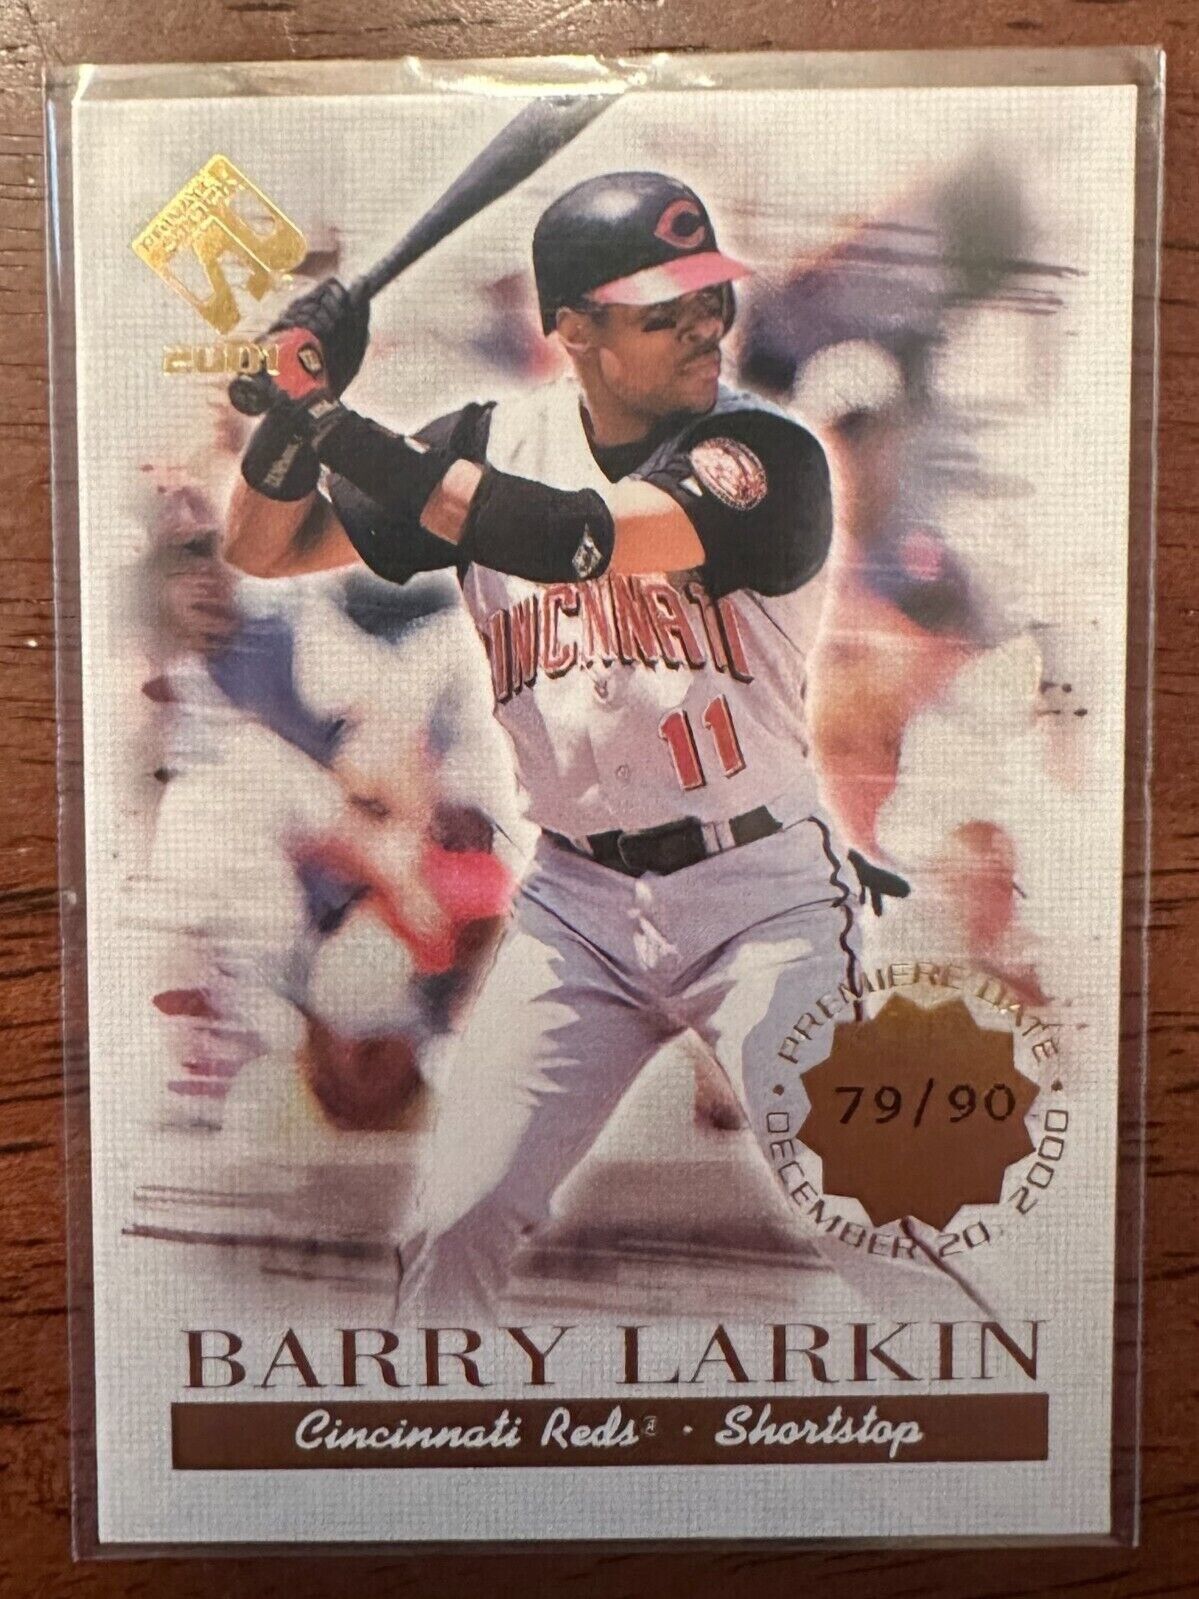 2001 Pacific Private Stock BARRY LARKIN Premiere Date Parallel 79/90 IMPOSSIBLE 